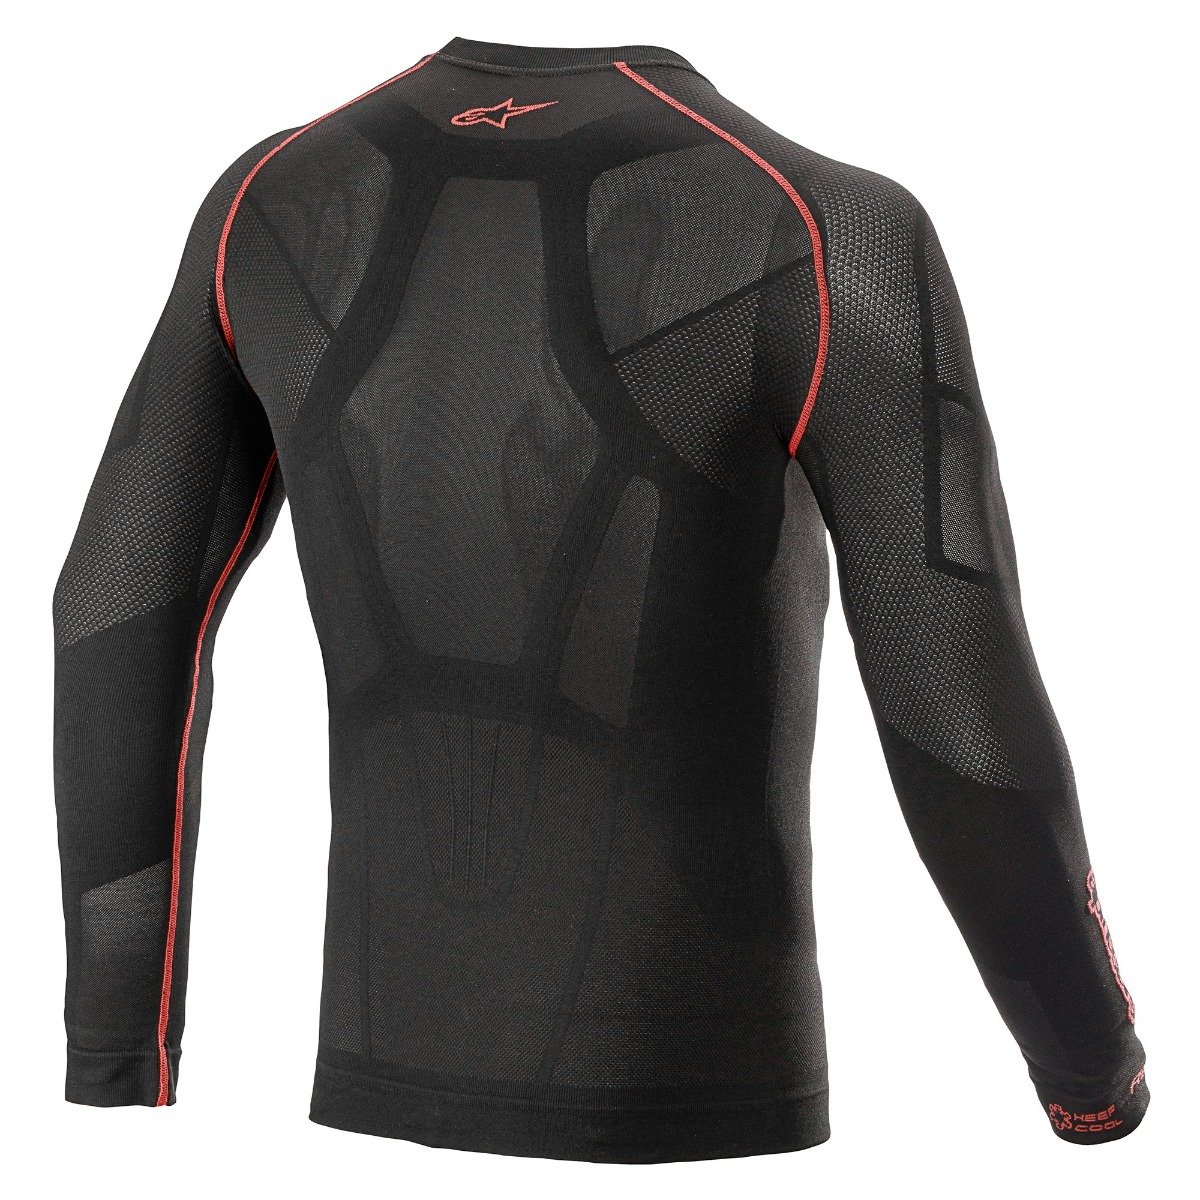 Image of Alpinestars Ride Tech V2 Top Long Sleeve Black Red Summer Taille M-L